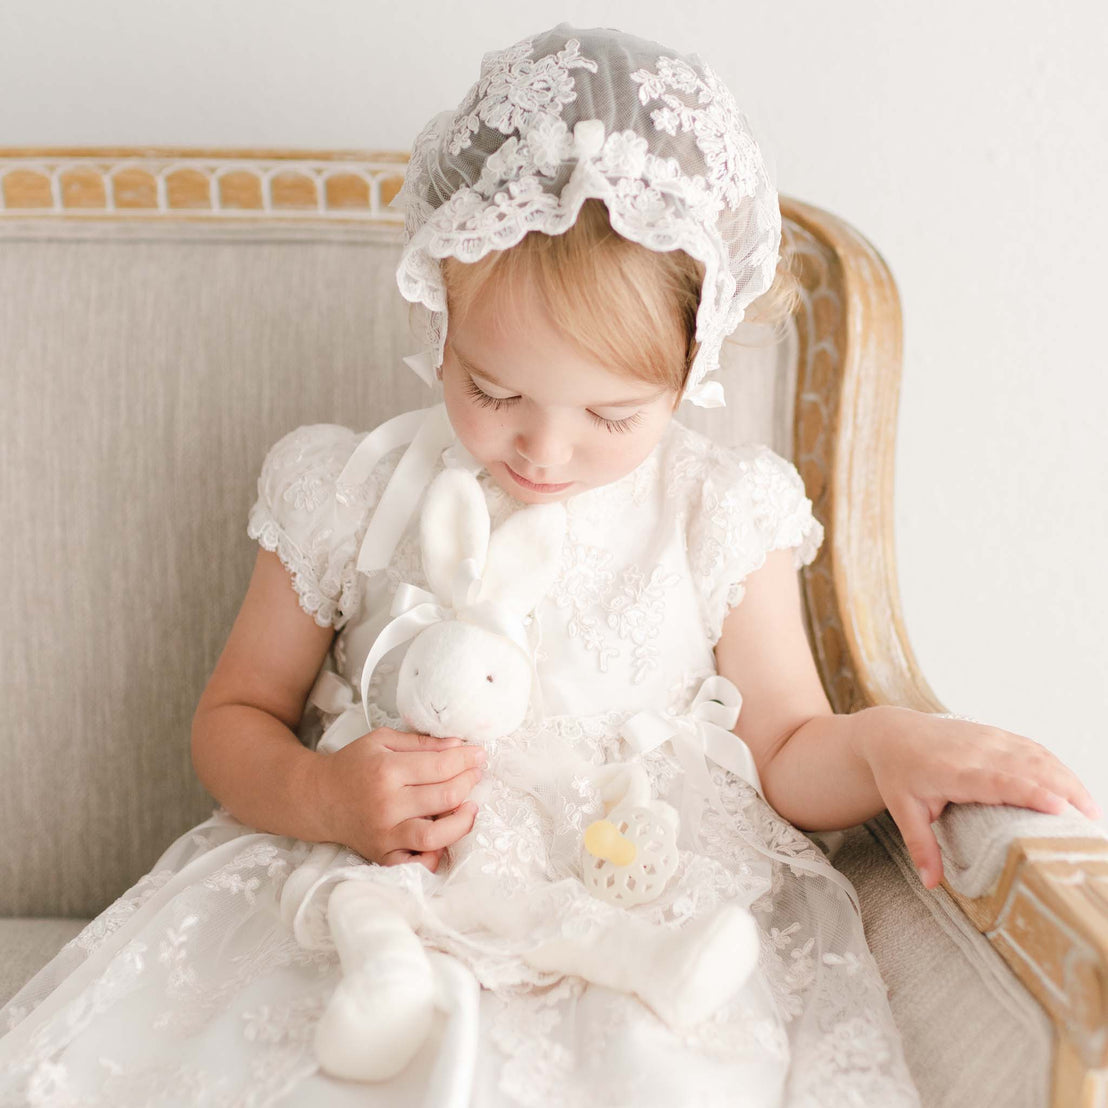 Baby girl lovingly holding a bunny pacifier holder toy. Girl is wearing a christening gown and bonnet.